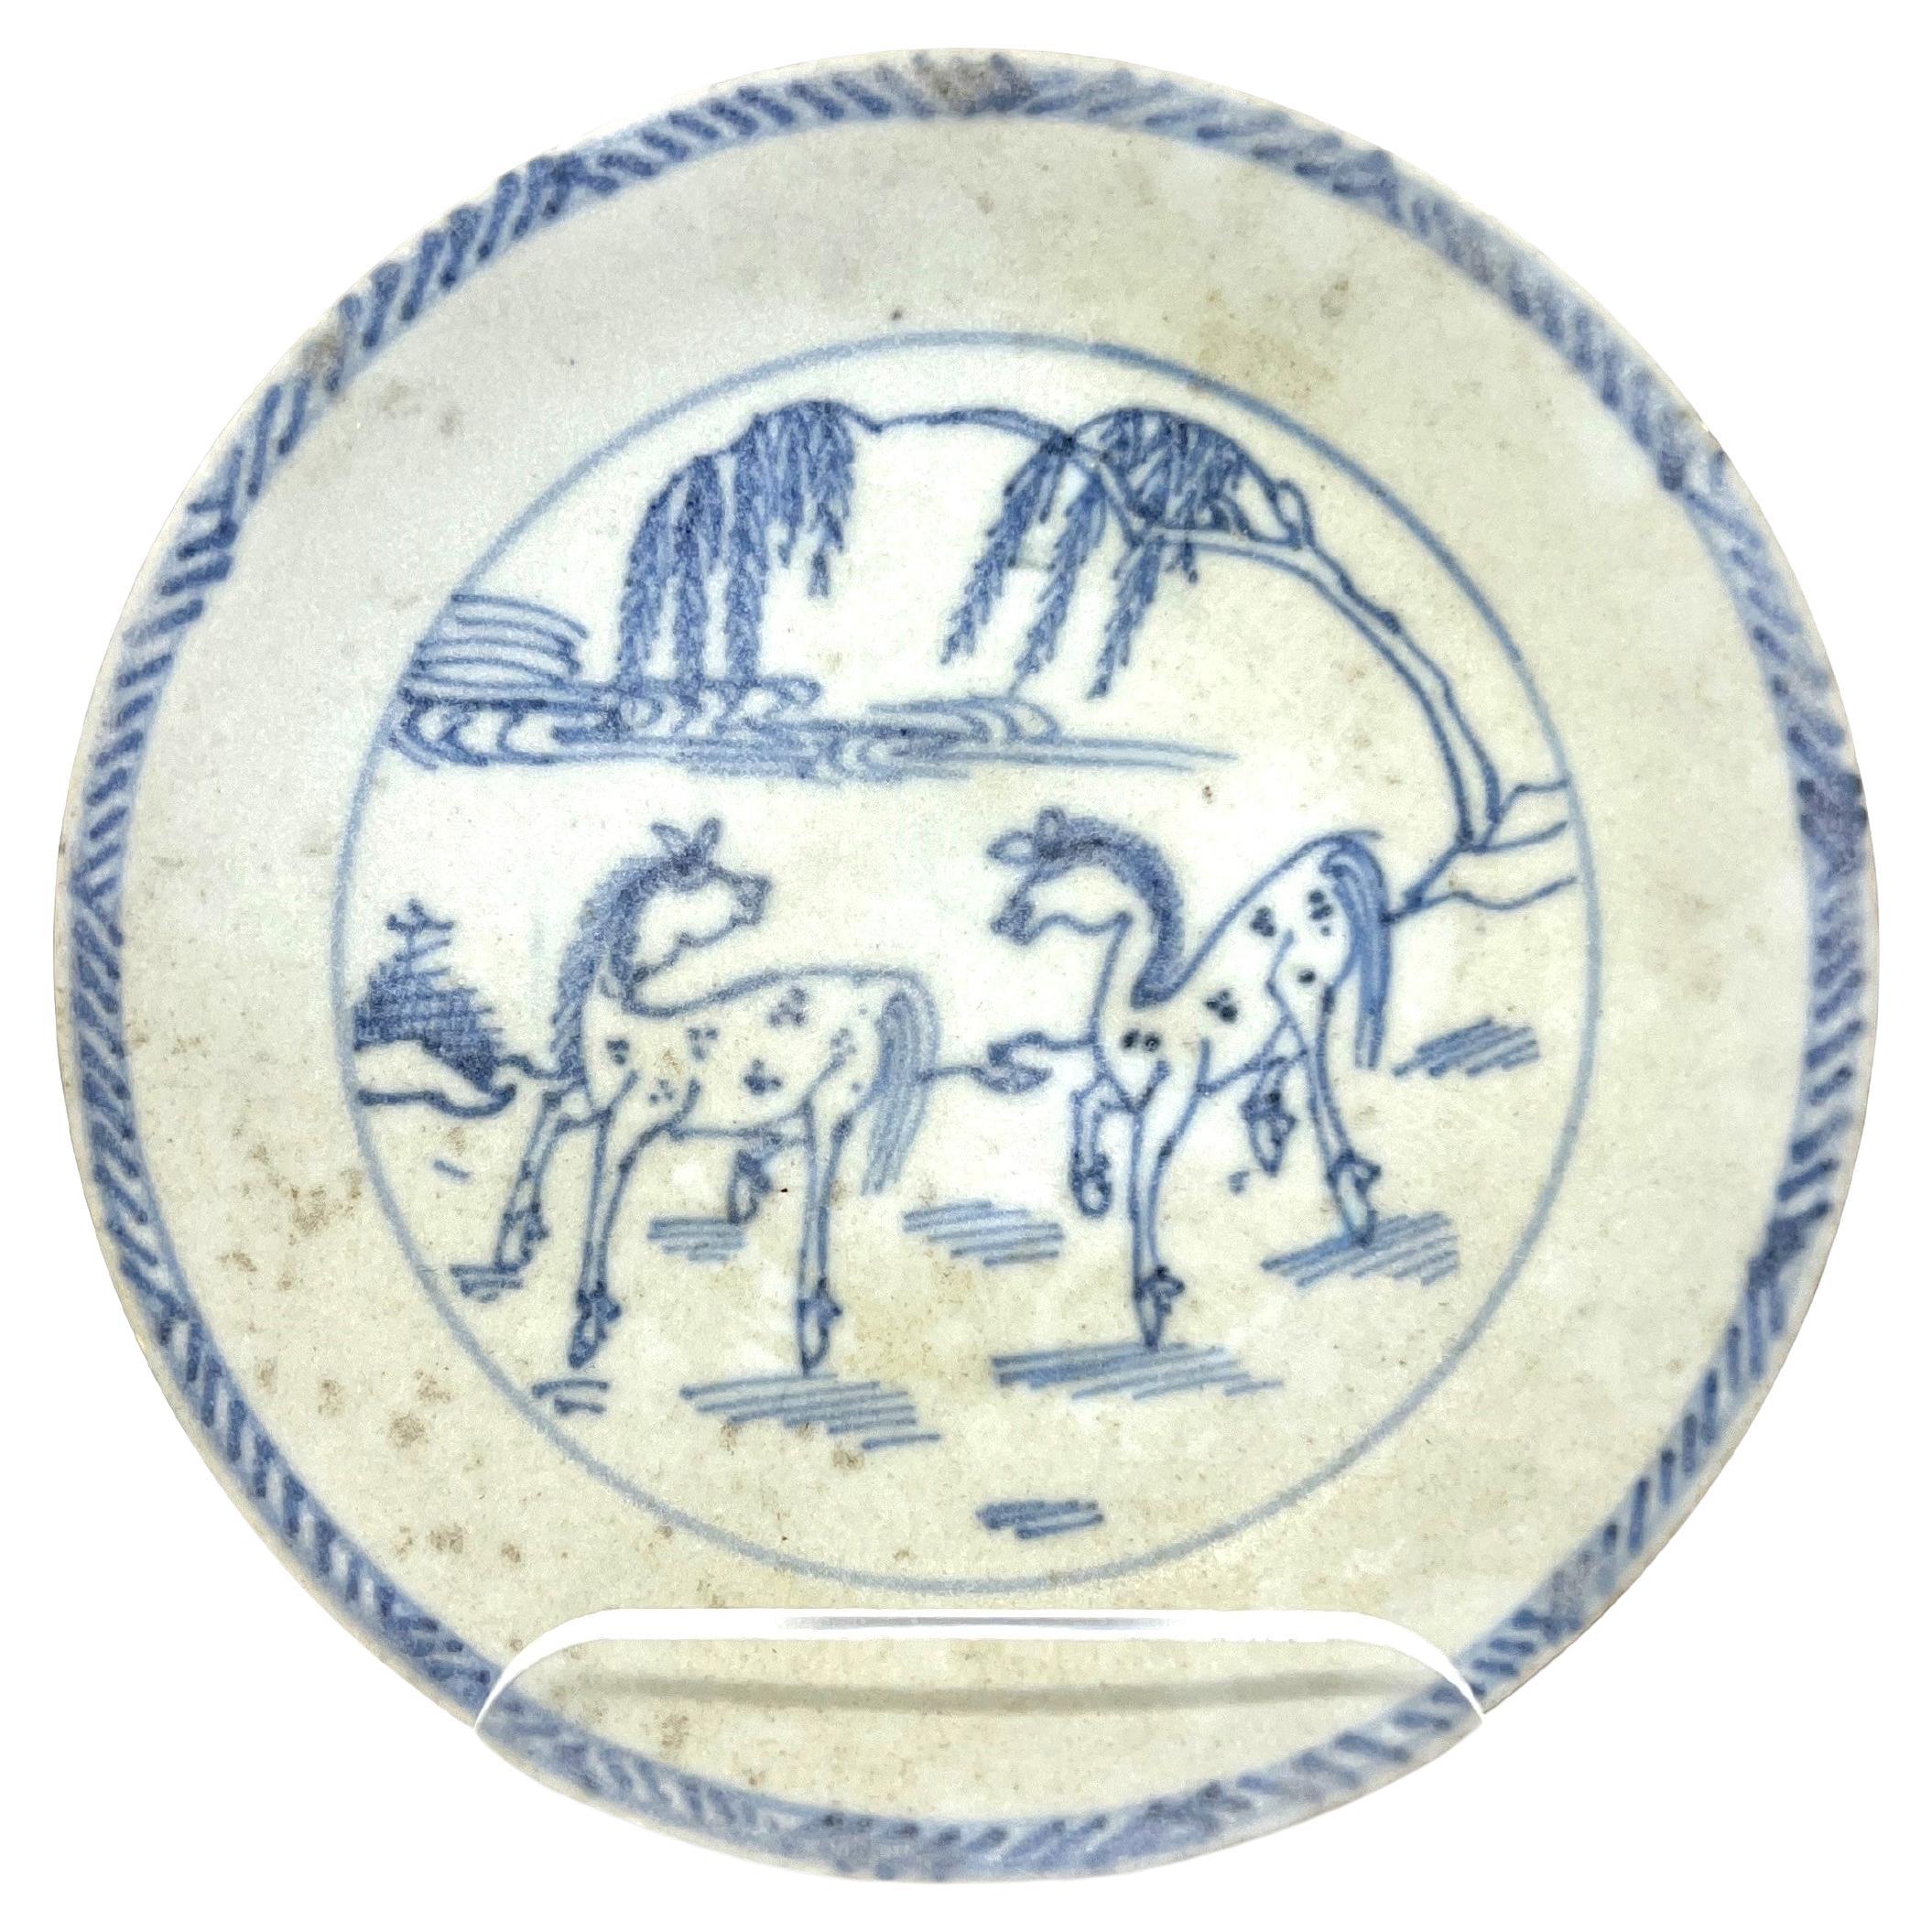 'Spotted Horses' Pattern Blue and White Saucer c1725, Qing Dynasty, Yongzheng